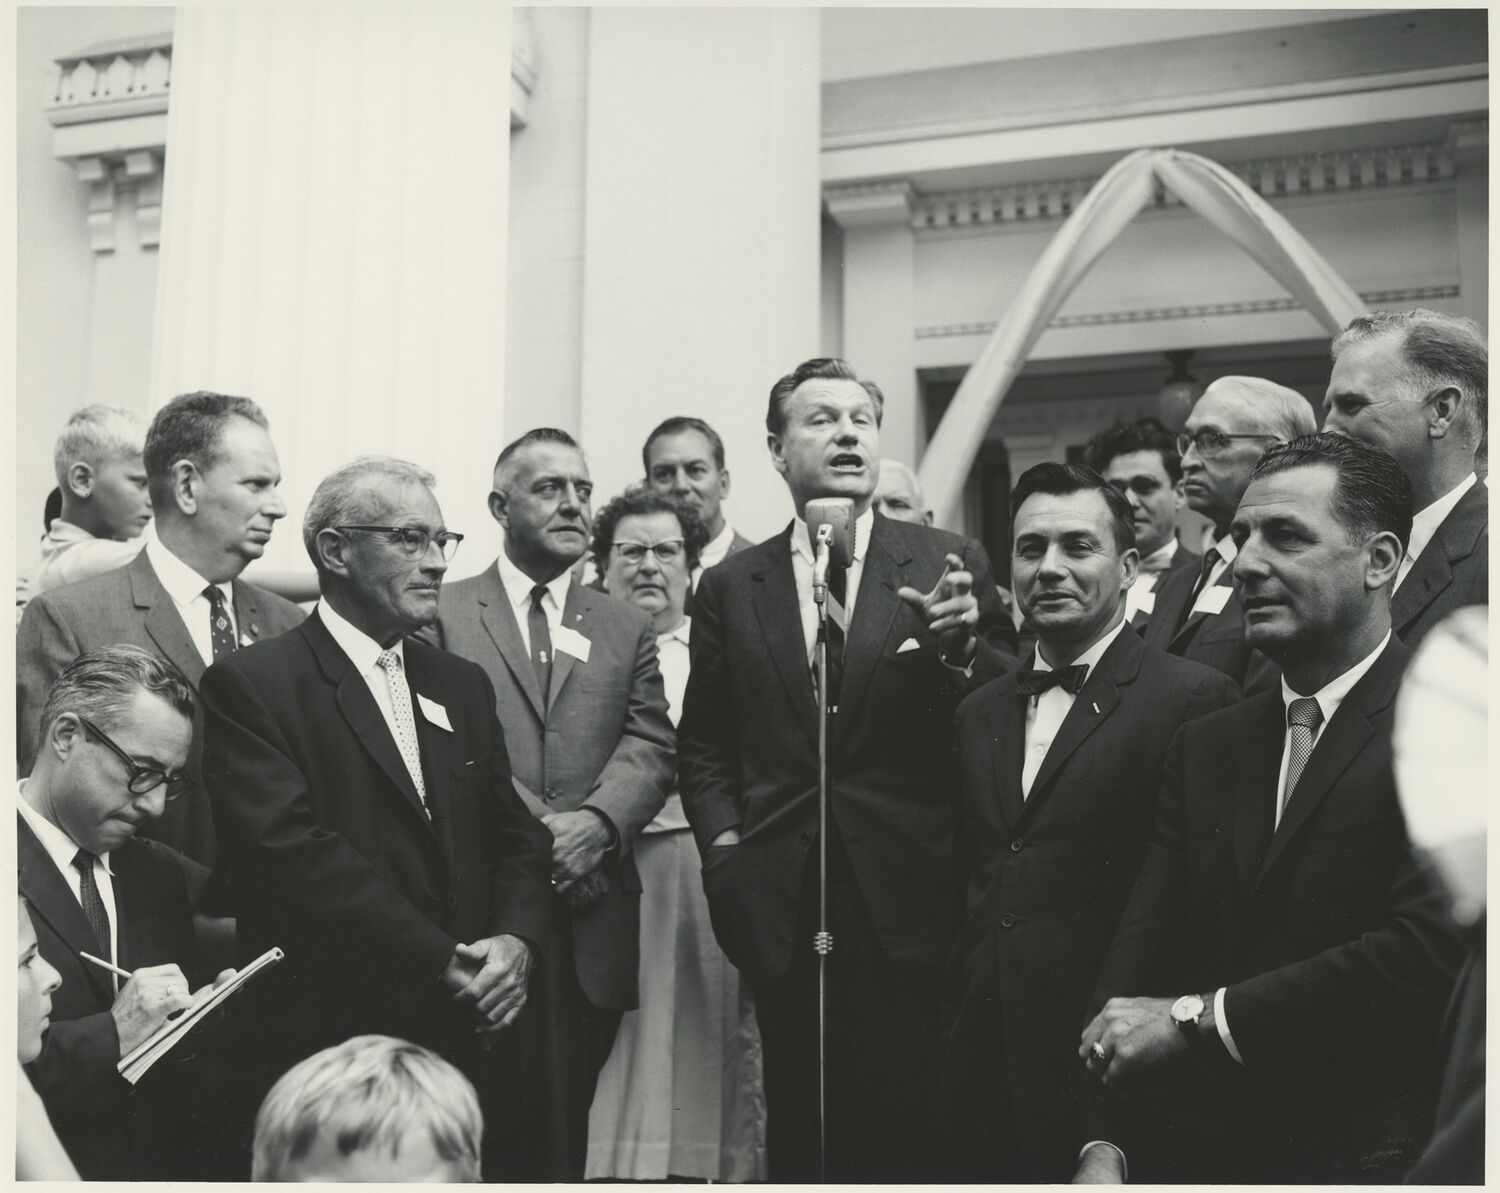 Governor Nelson Rockefeller speaking at the entrance to the Sag Harbor Whaling and Historical Museum during a visit on July 18, 1962. COURTESY JOHN JERMAIN MEMORIAL LIBRARY